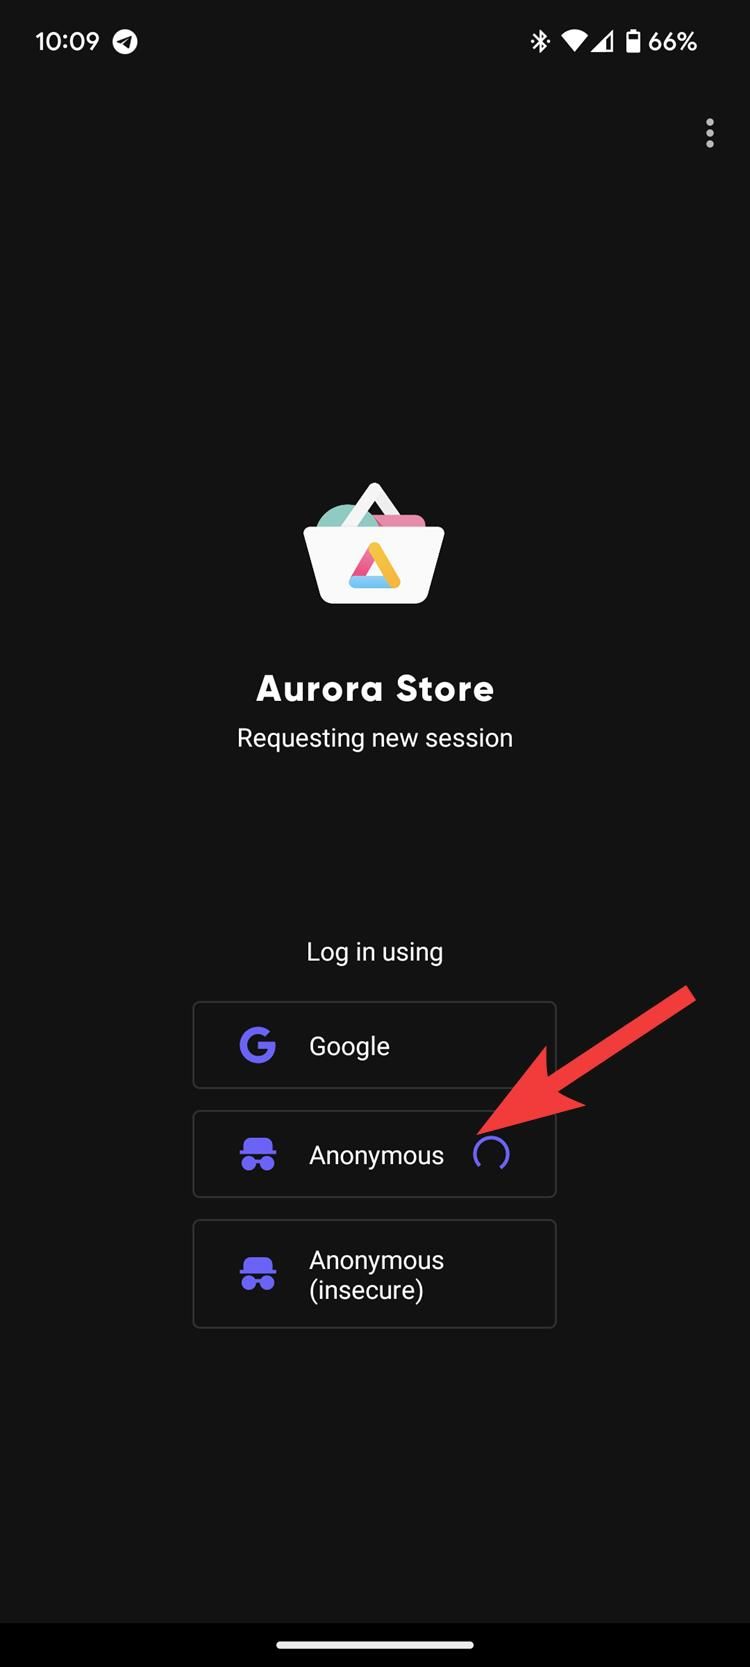 The login page in the Aurora Store app with a red arrow pointing to the Anonymous option